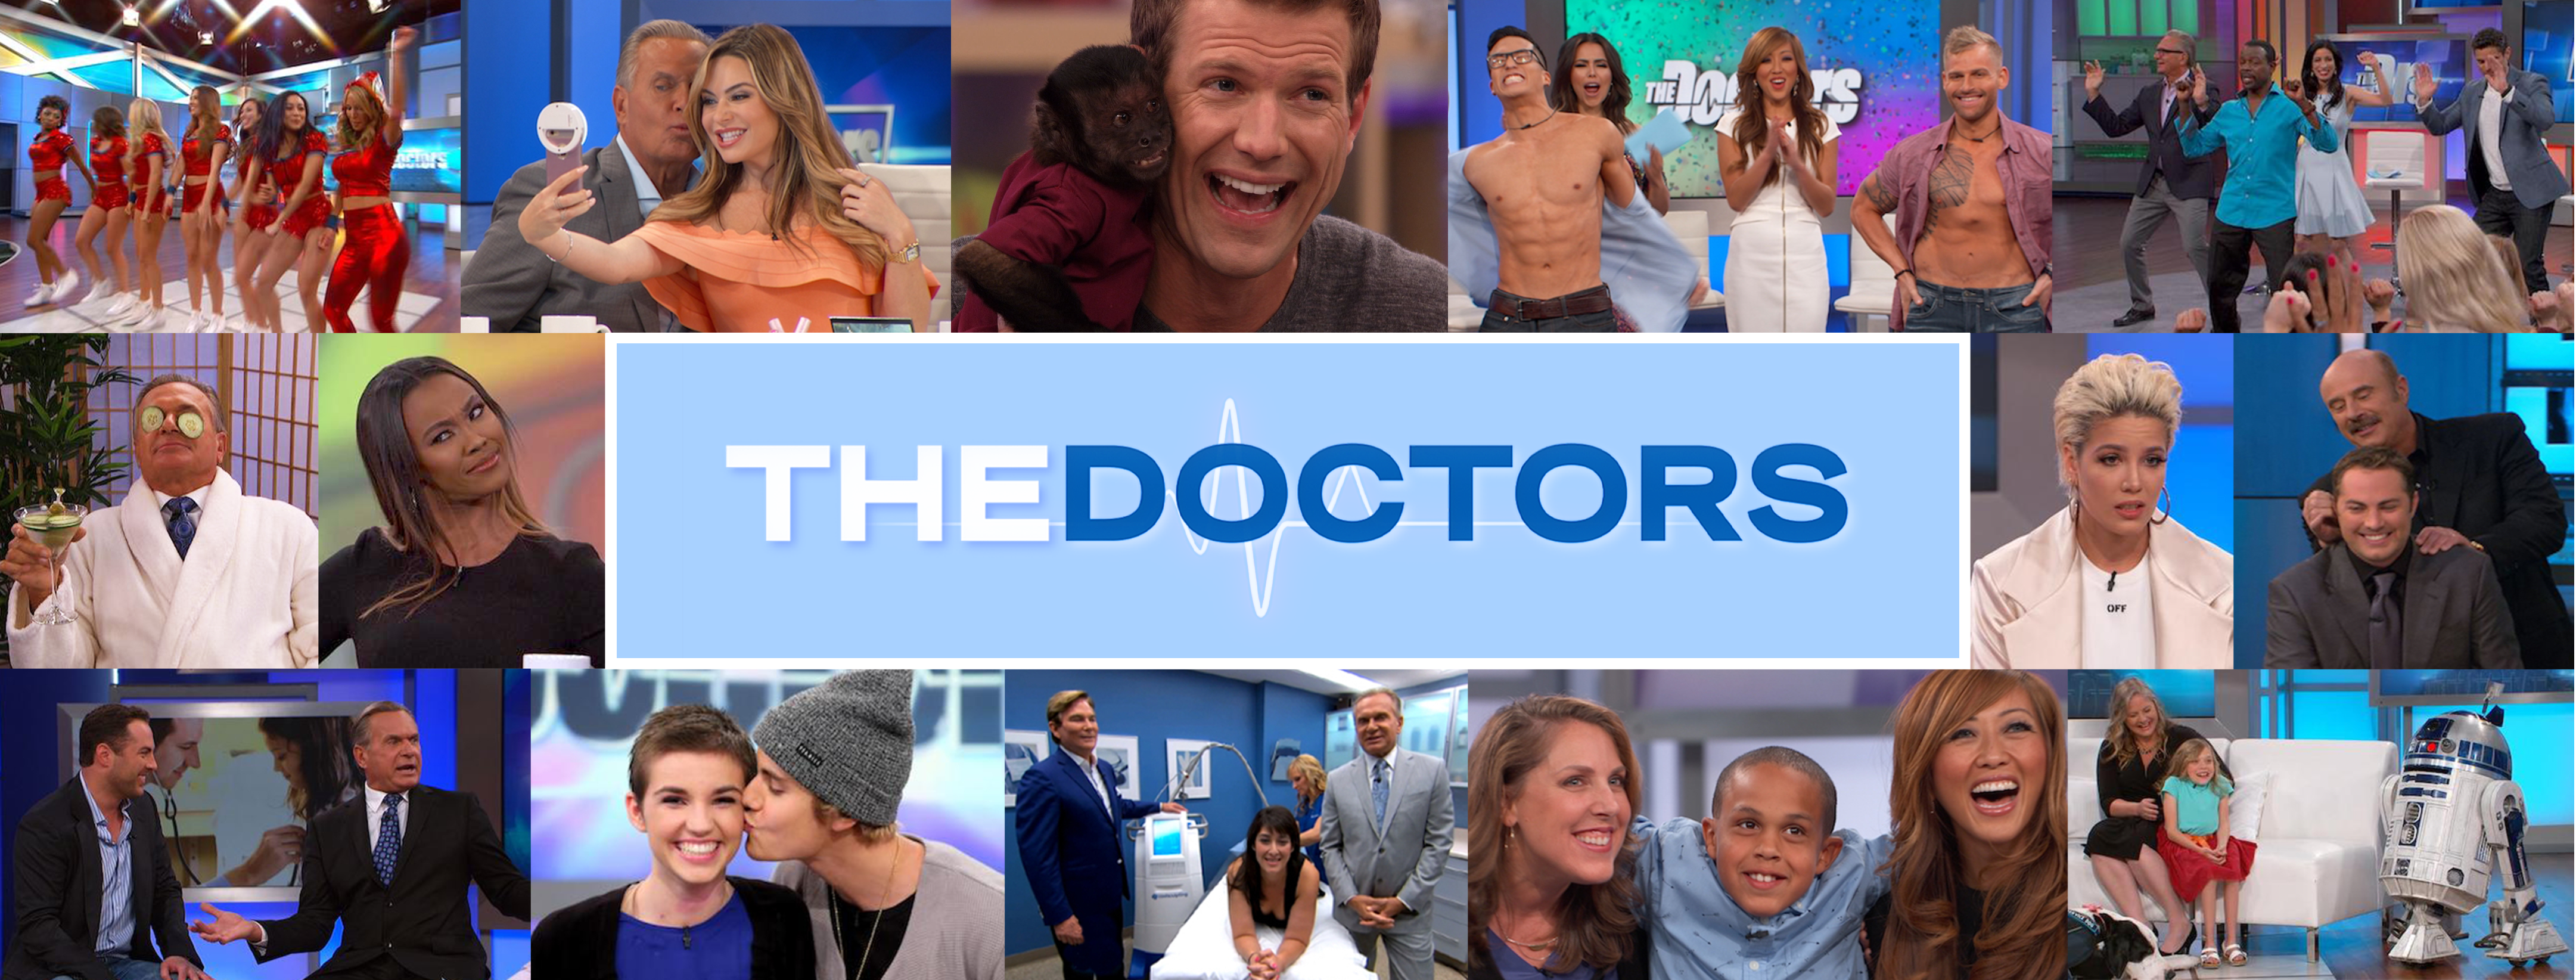 New Treatment for GERD | The Doctors TV Show